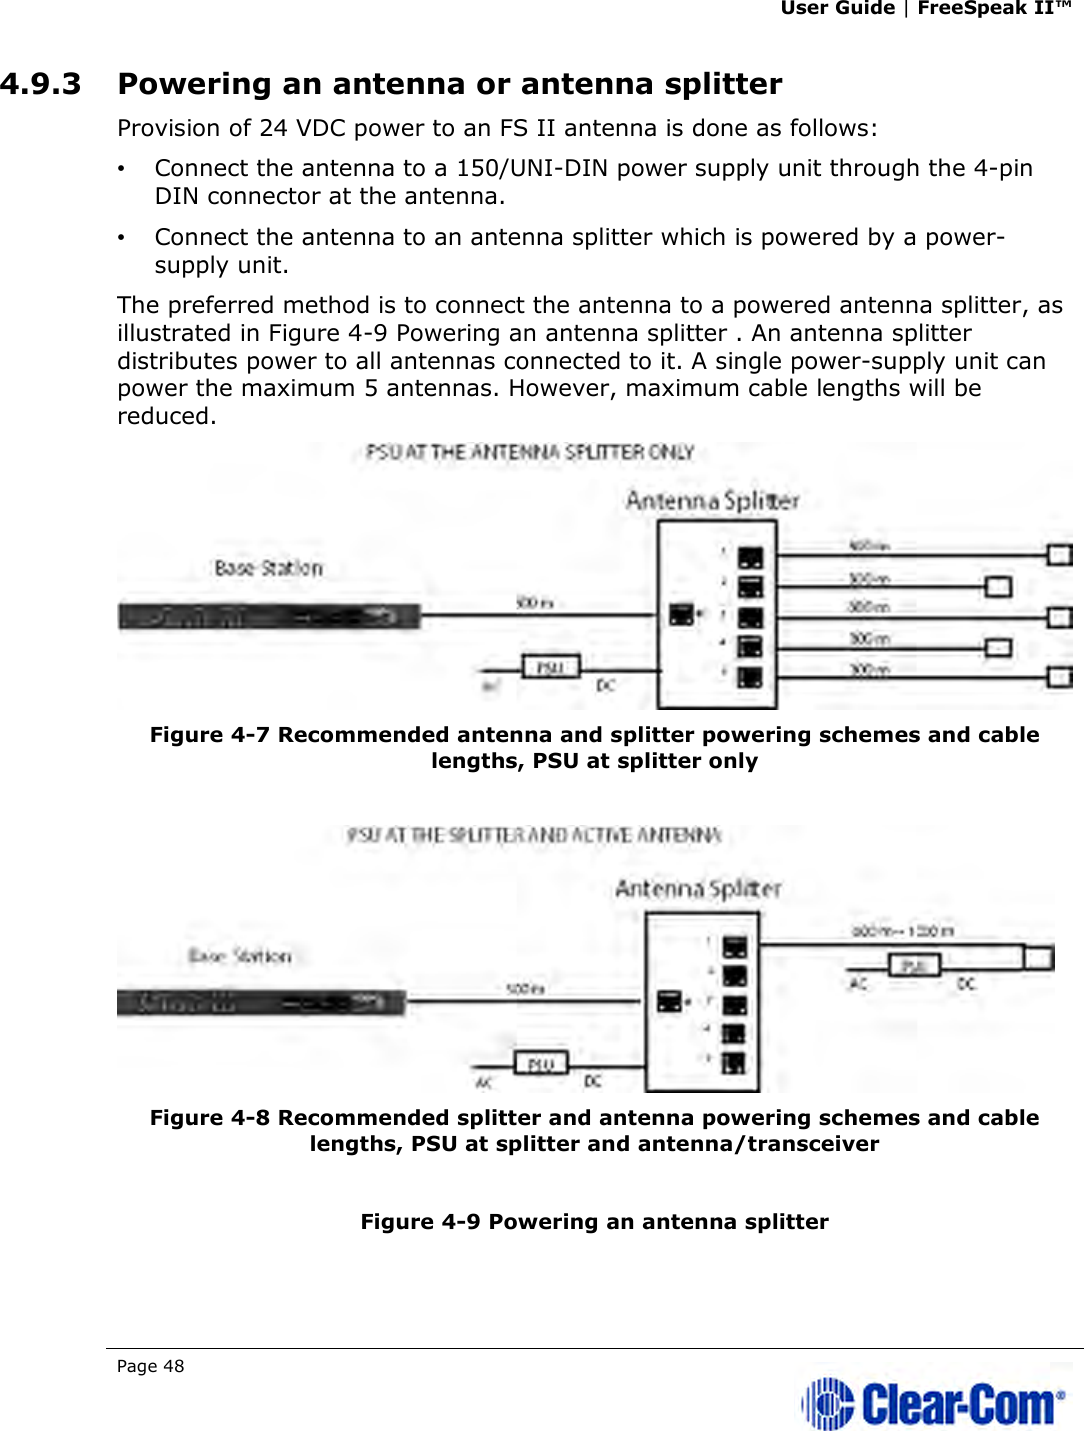 User Guide | FreeSpeak II™  Page 48   4.9.3 Powering an antenna or antenna splitter Provision of 24 VDC power to an FS II antenna is done as follows:  •   Connect the antenna to a 150/UNI-DIN power supply unit through the 4-pin DIN connector at the antenna.  •   Connect the antenna to an antenna splitter which is powered by a power-supply unit.  The preferred method is to connect the antenna to a powered antenna splitter, as illustrated in Figure 4-9 Powering an antenna splitter . An antenna splitter distributes power to all antennas connected to it. A single power-supply unit can power the maximum 5 antennas. However, maximum cable lengths will be reduced.  Figure 4-7 Recommended antenna and splitter powering schemes and cable lengths, PSU at splitter only    Figure 4-8 Recommended splitter and antenna powering schemes and cable lengths, PSU at splitter and antenna/transceiver  Figure 4-9 Powering an antenna splitter  